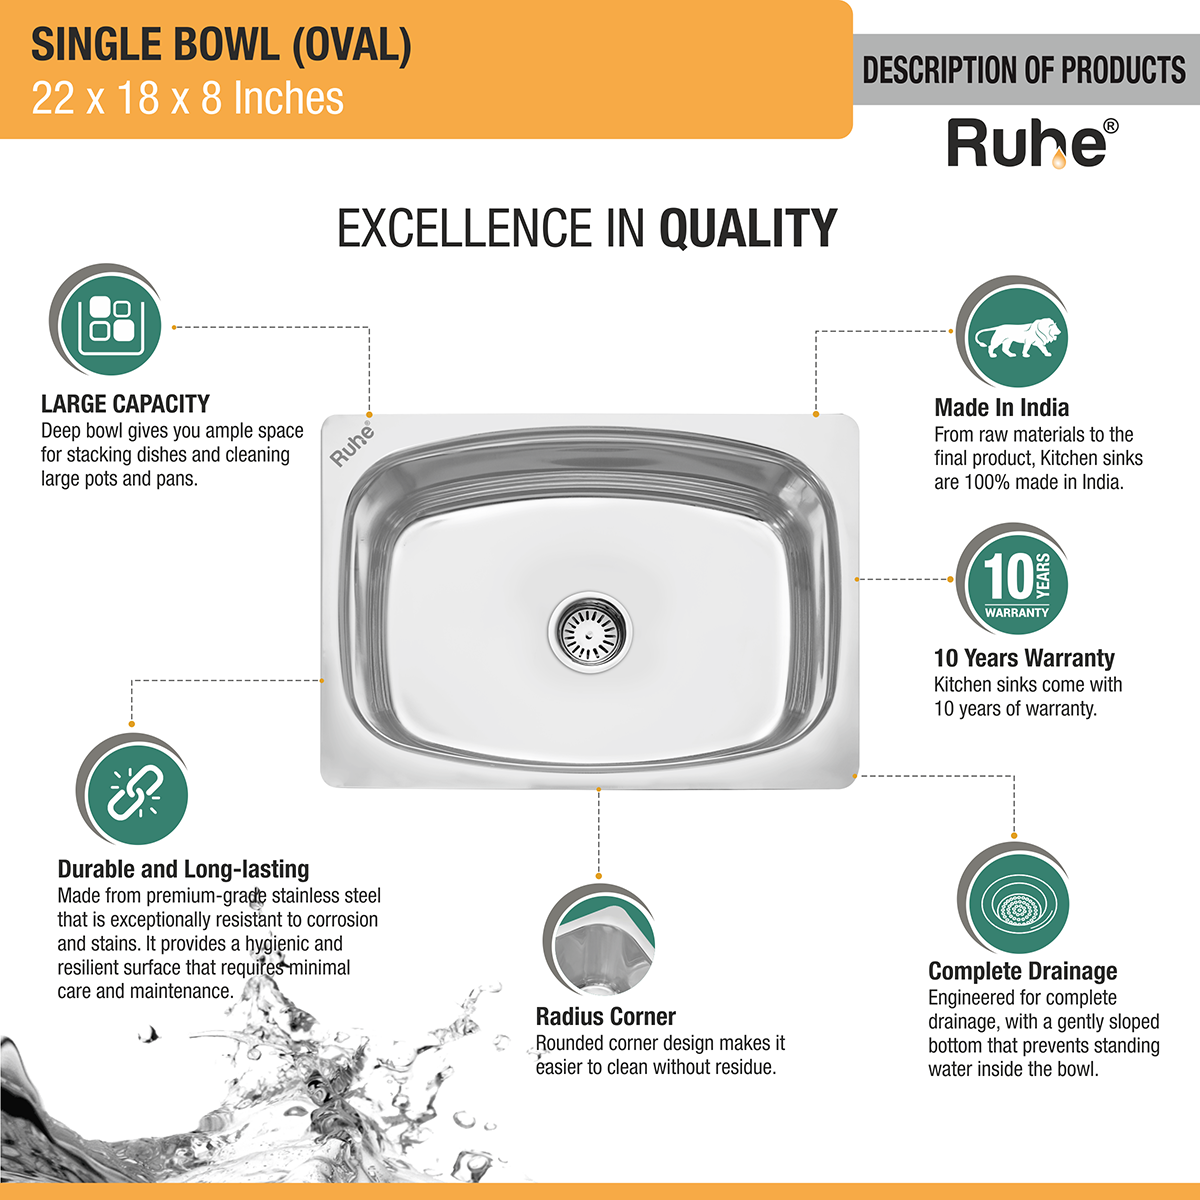 Oval Single Bowl (22 x 18 x 8 inches) Kitchen Sink description of products